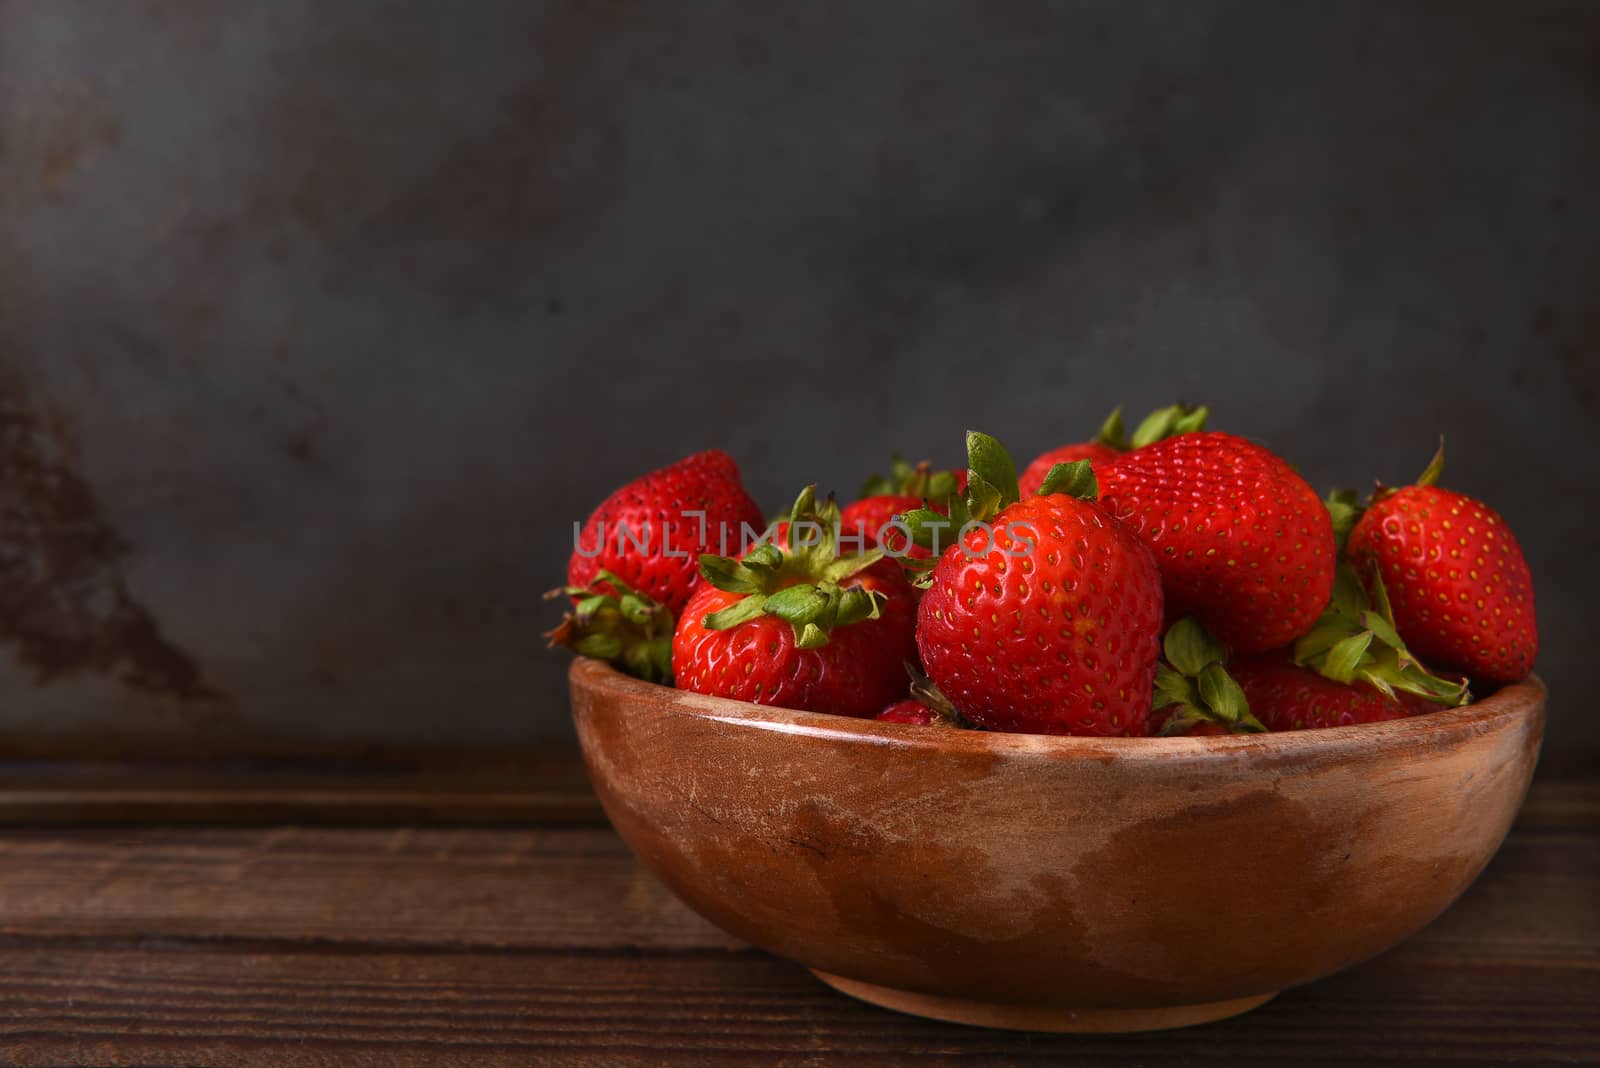 Horizontal still life of a bowl full of fresh picked strawberries on a wood table. Horizontal format with copy space.